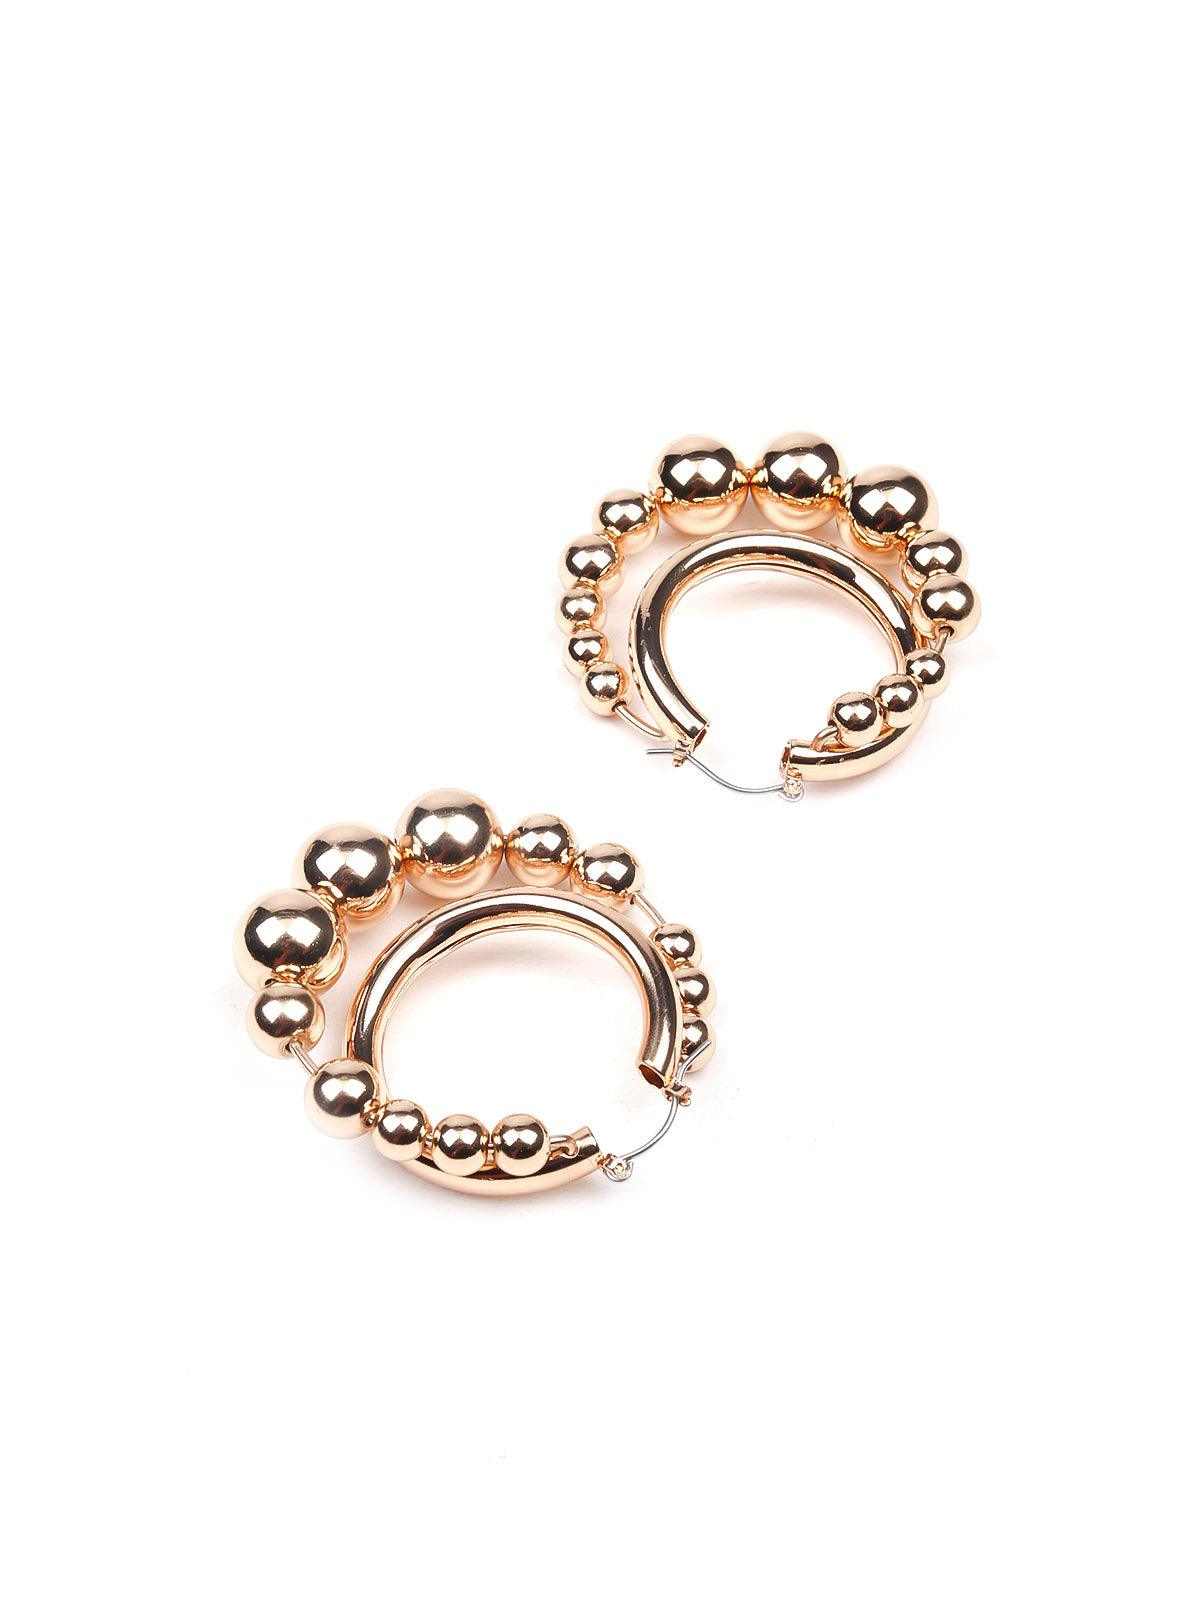 Women's Rounded Gold-Tone Beaded Statement Earrings - Odette